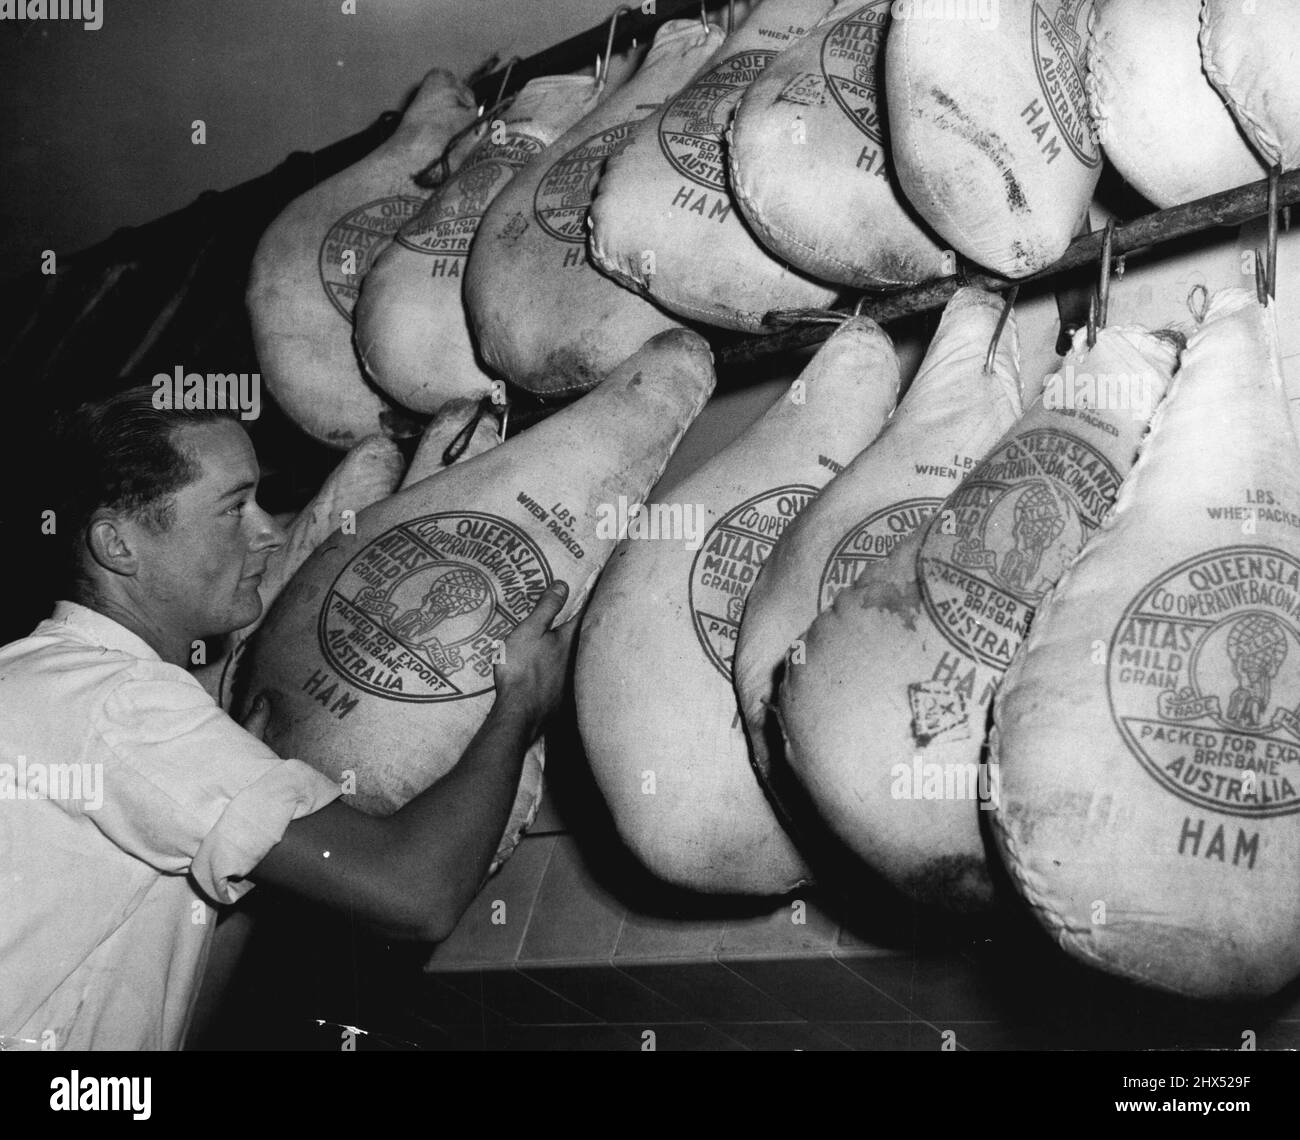 Ham for Christmas dinner Although hams like there are not plentiful they are available they are available at a higher price than last year. December 01, 1949. Stock Photo